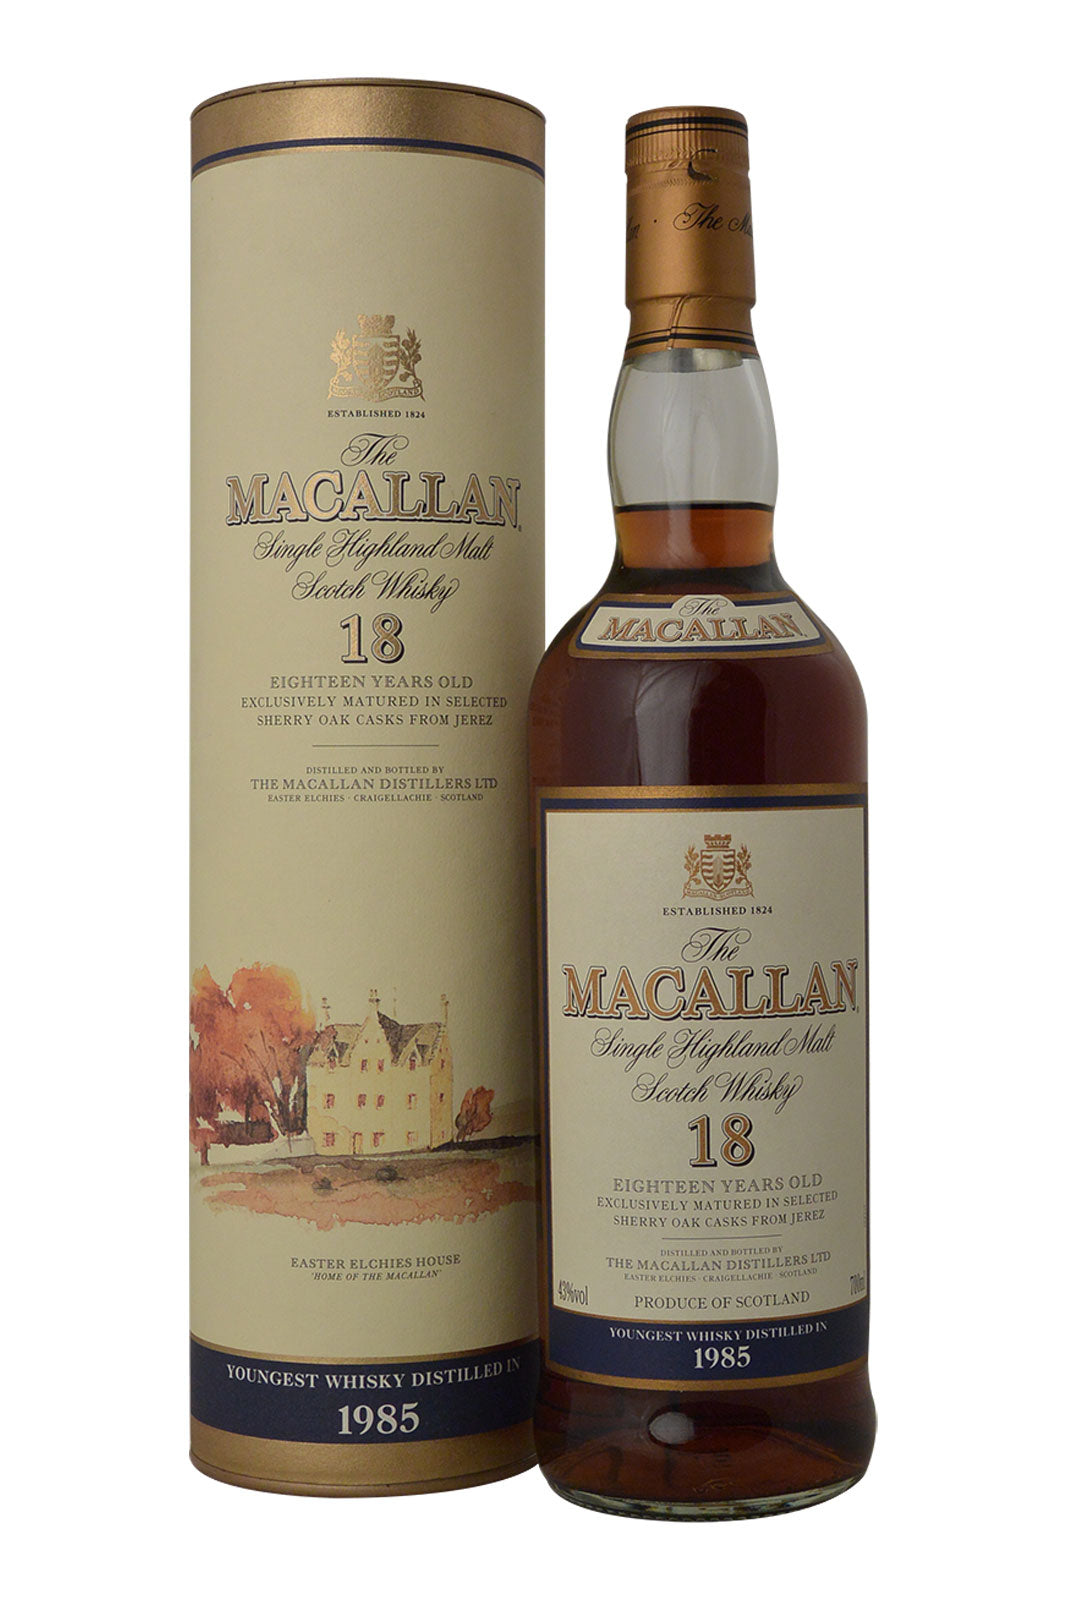 Macallan 18 Year Old 1985 Oloroso Sherry Cask: A Timeless Whisky Journey